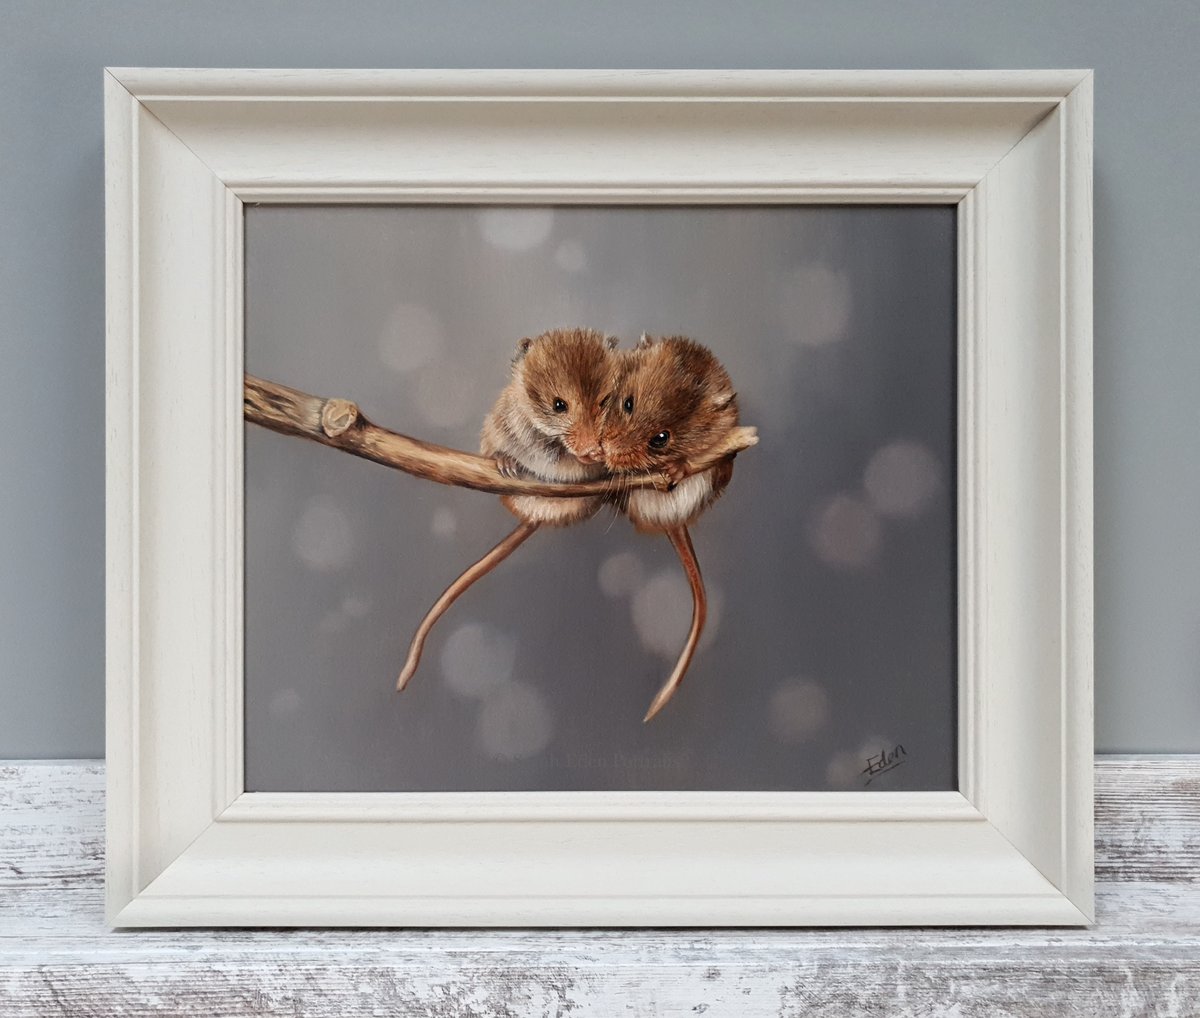 Just framed this original painting ready for sale, entitled 'Bubble and Squeak', oil on board, 12 x 14'🐭🐭

#bubbleandsqueak #harvestmice #fieldmice #mice #ukwildlife #wildlifepainting #cuteanimals #artforsale #oilpainting